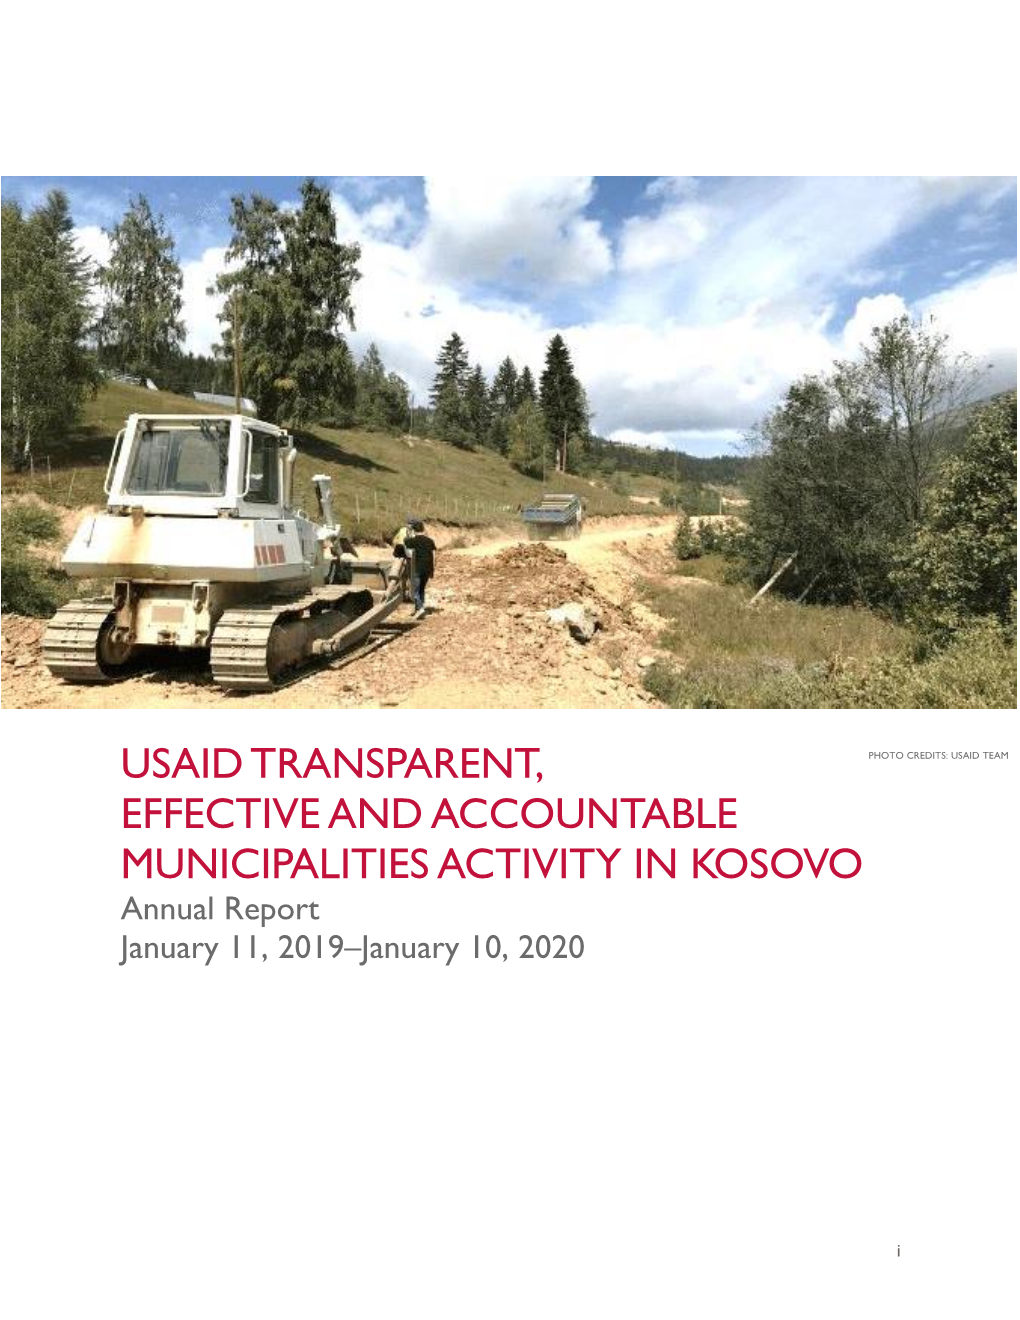 Usaid Transparent, Effective and Accountable Municipalities Activity in Kosovo